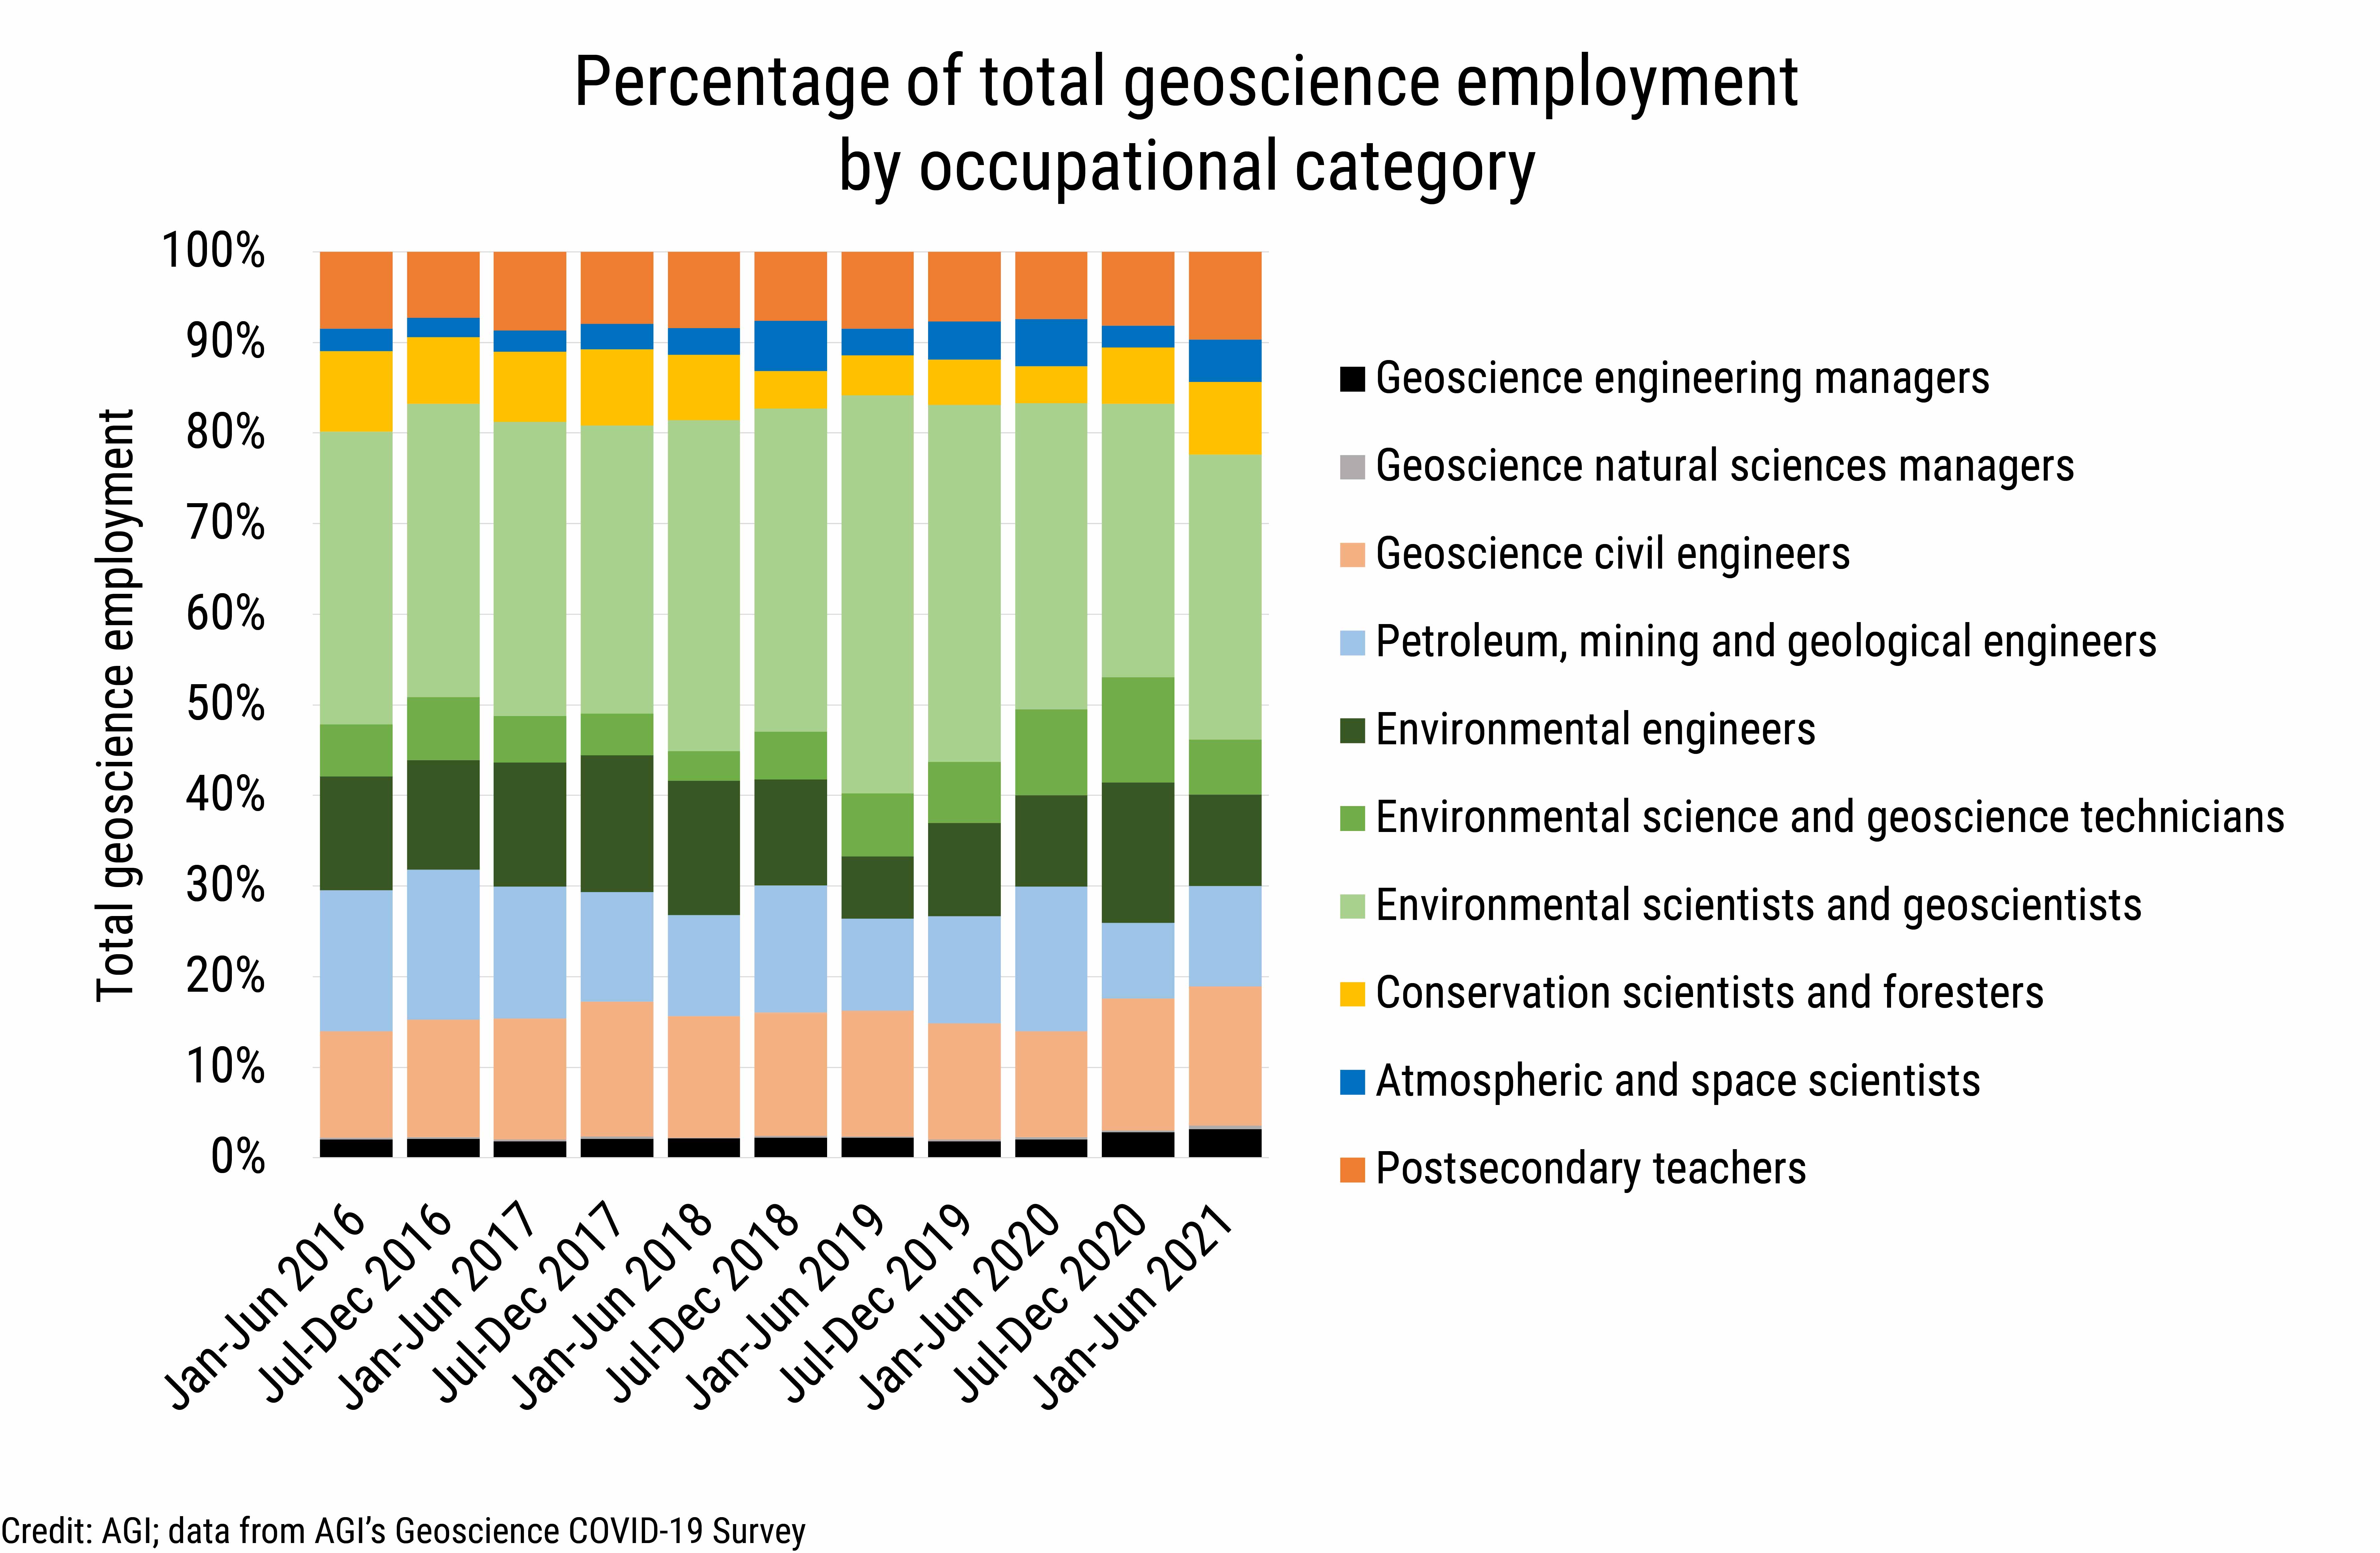 DB_2021-023 chart 02: Percentage of total geoscience employment by occupational category (Credit: AGI, data derived from the U.S. Census Bureau, Current Population Survey)